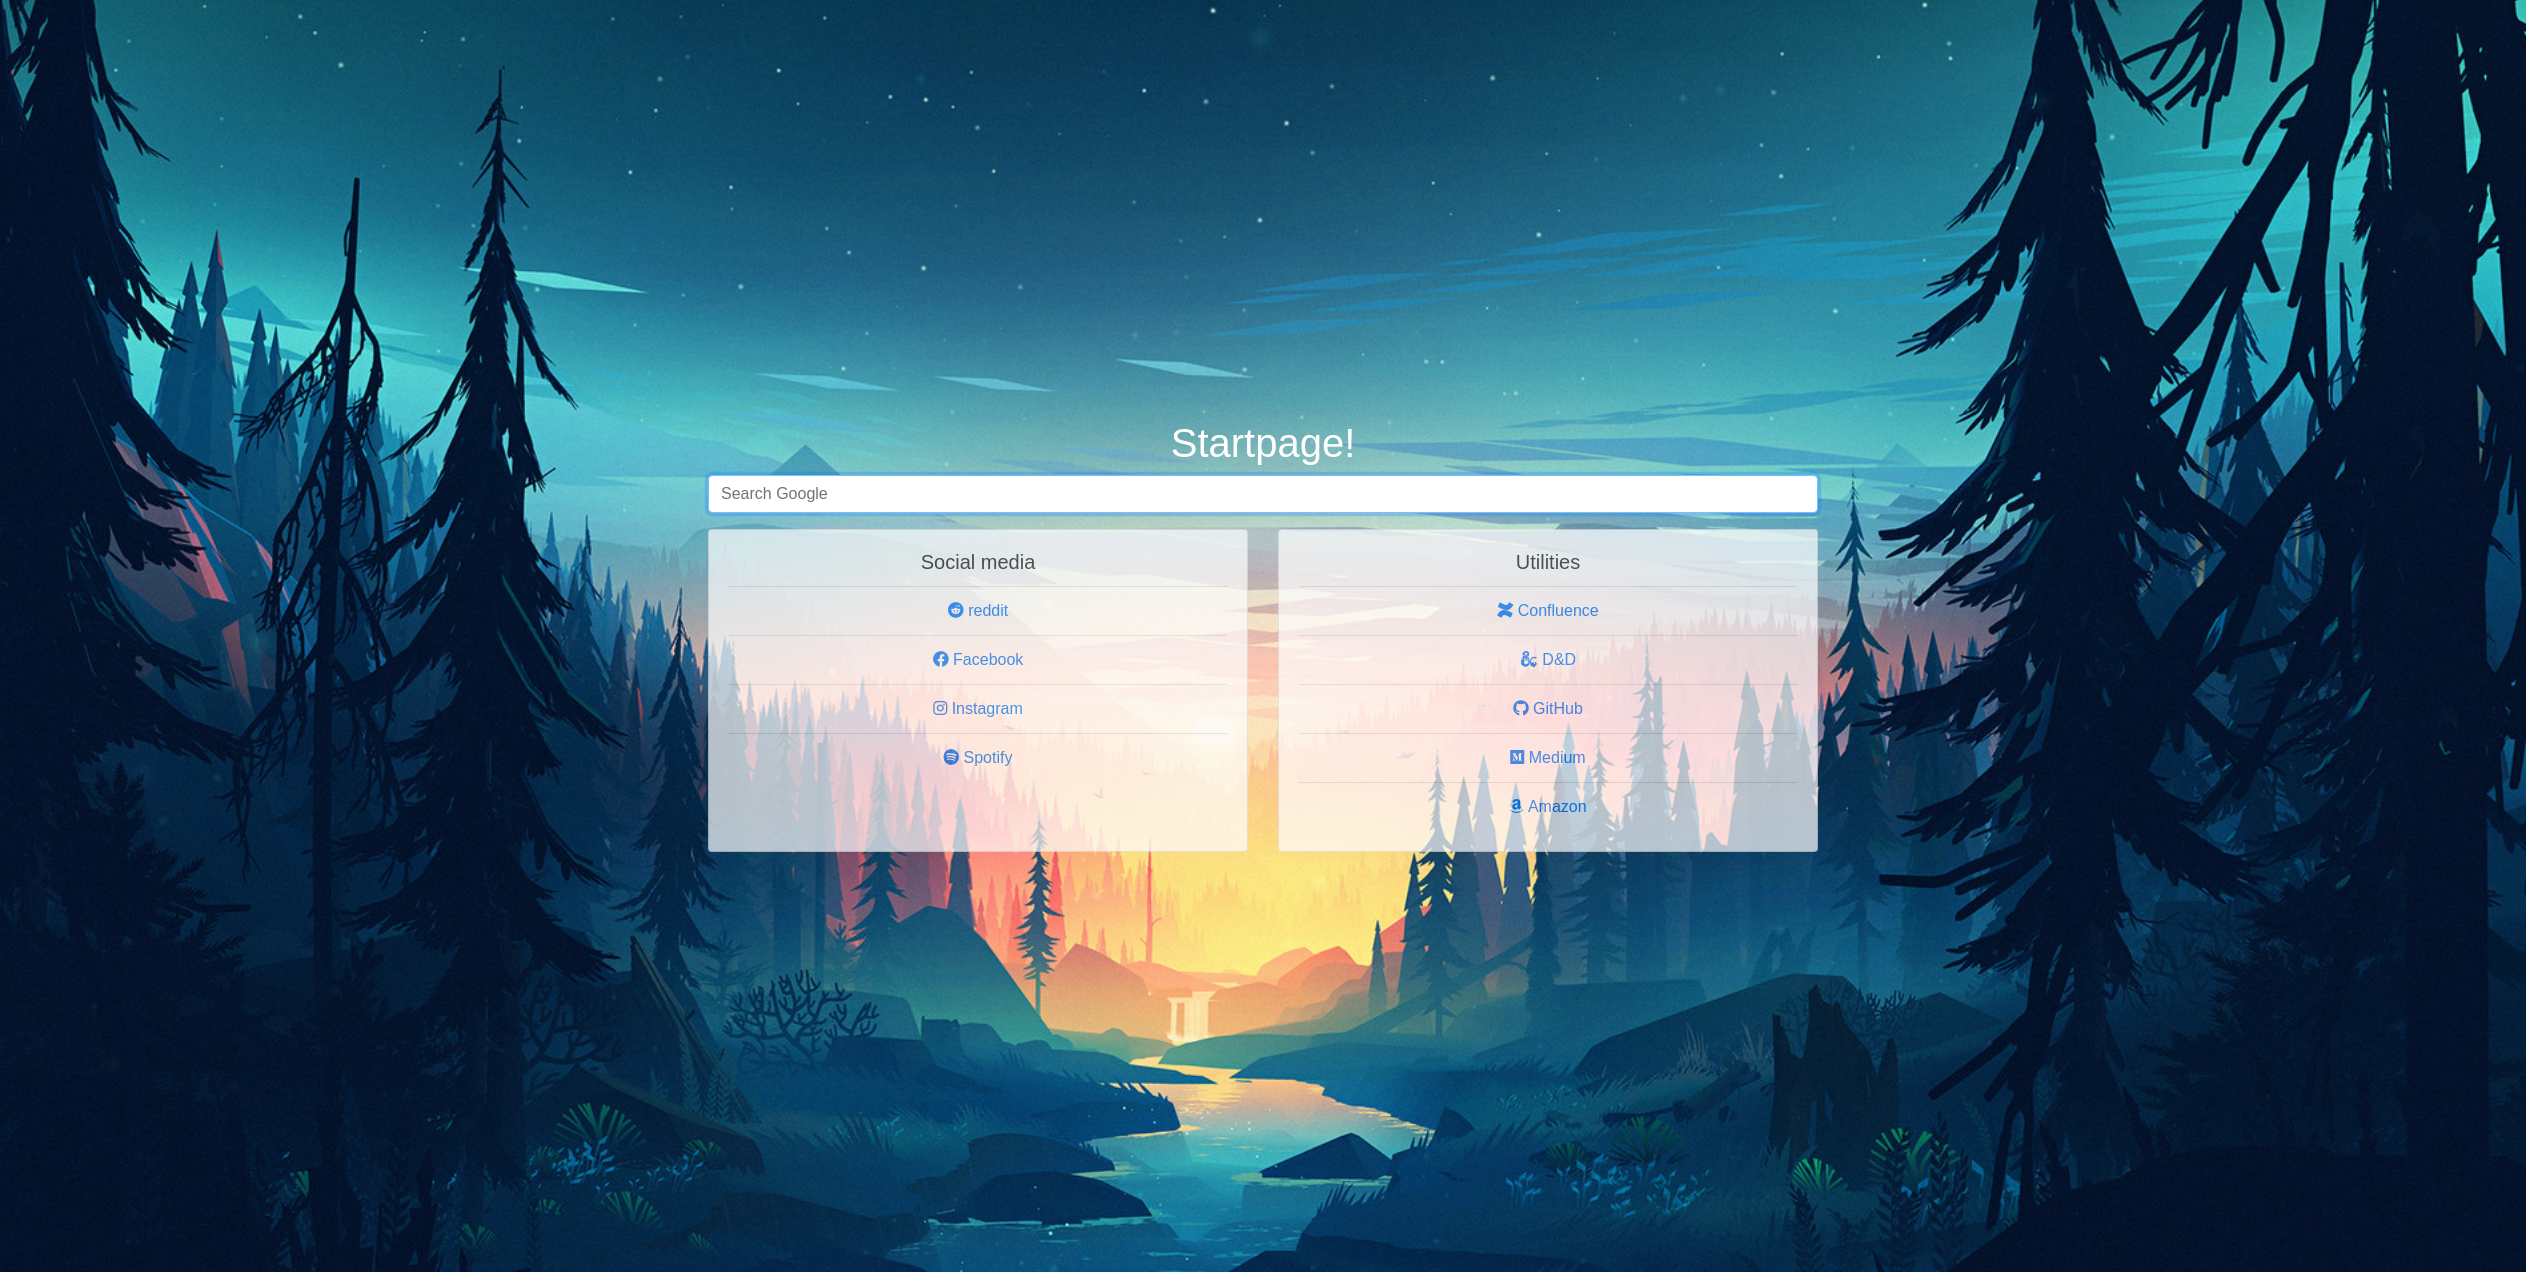 Startpage group mode